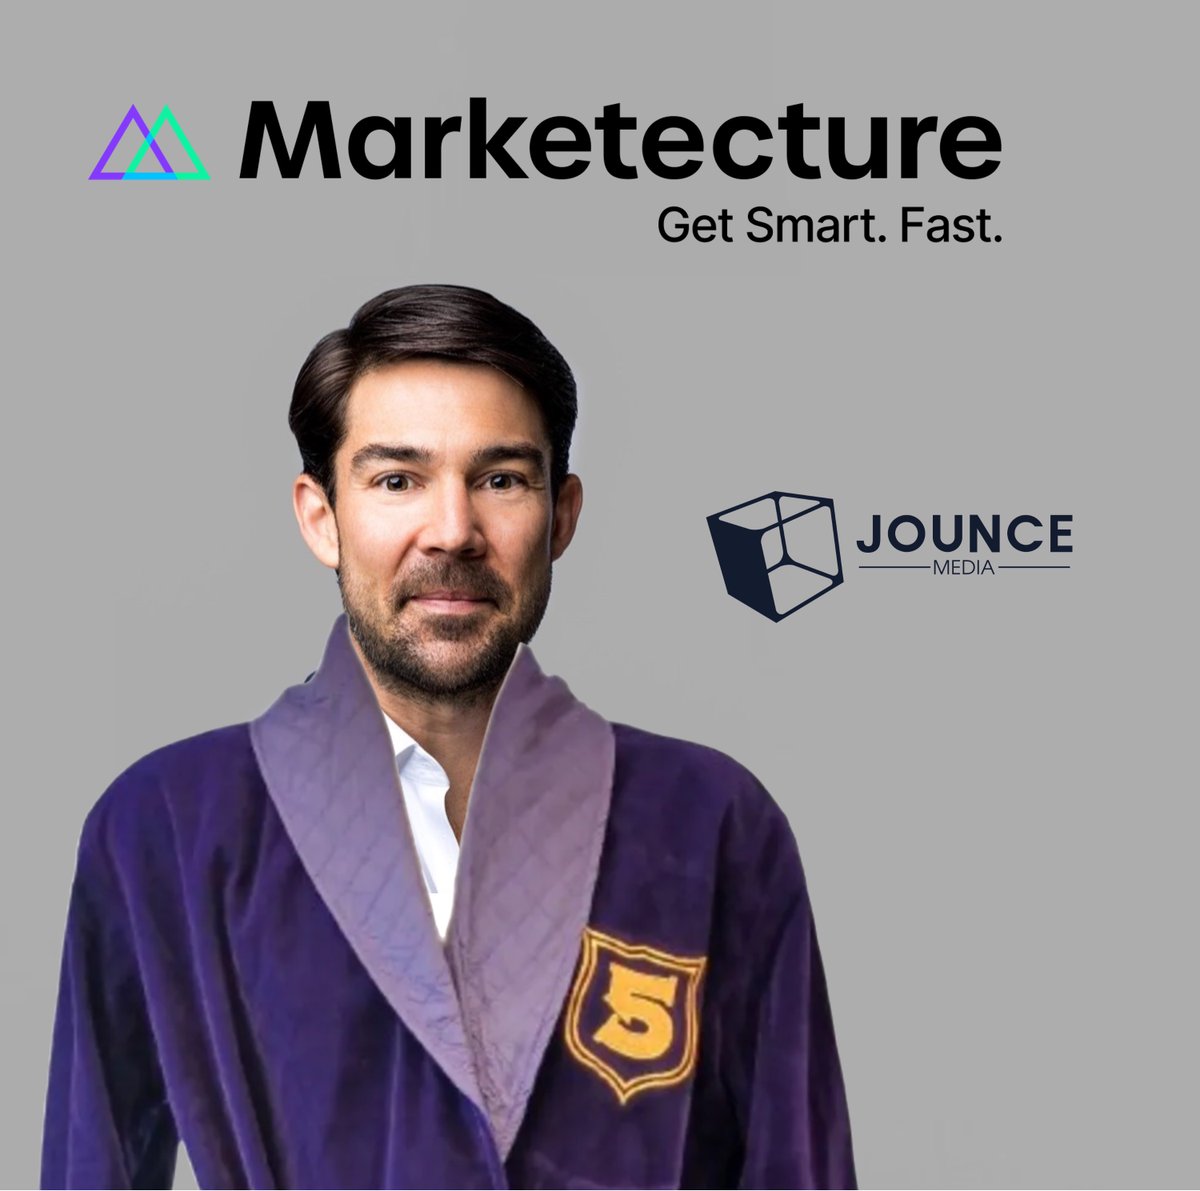 This is a great pod featuring the always insightful @ckane. No surprise he's on his way to the 5 timer club on @marketecturetv.